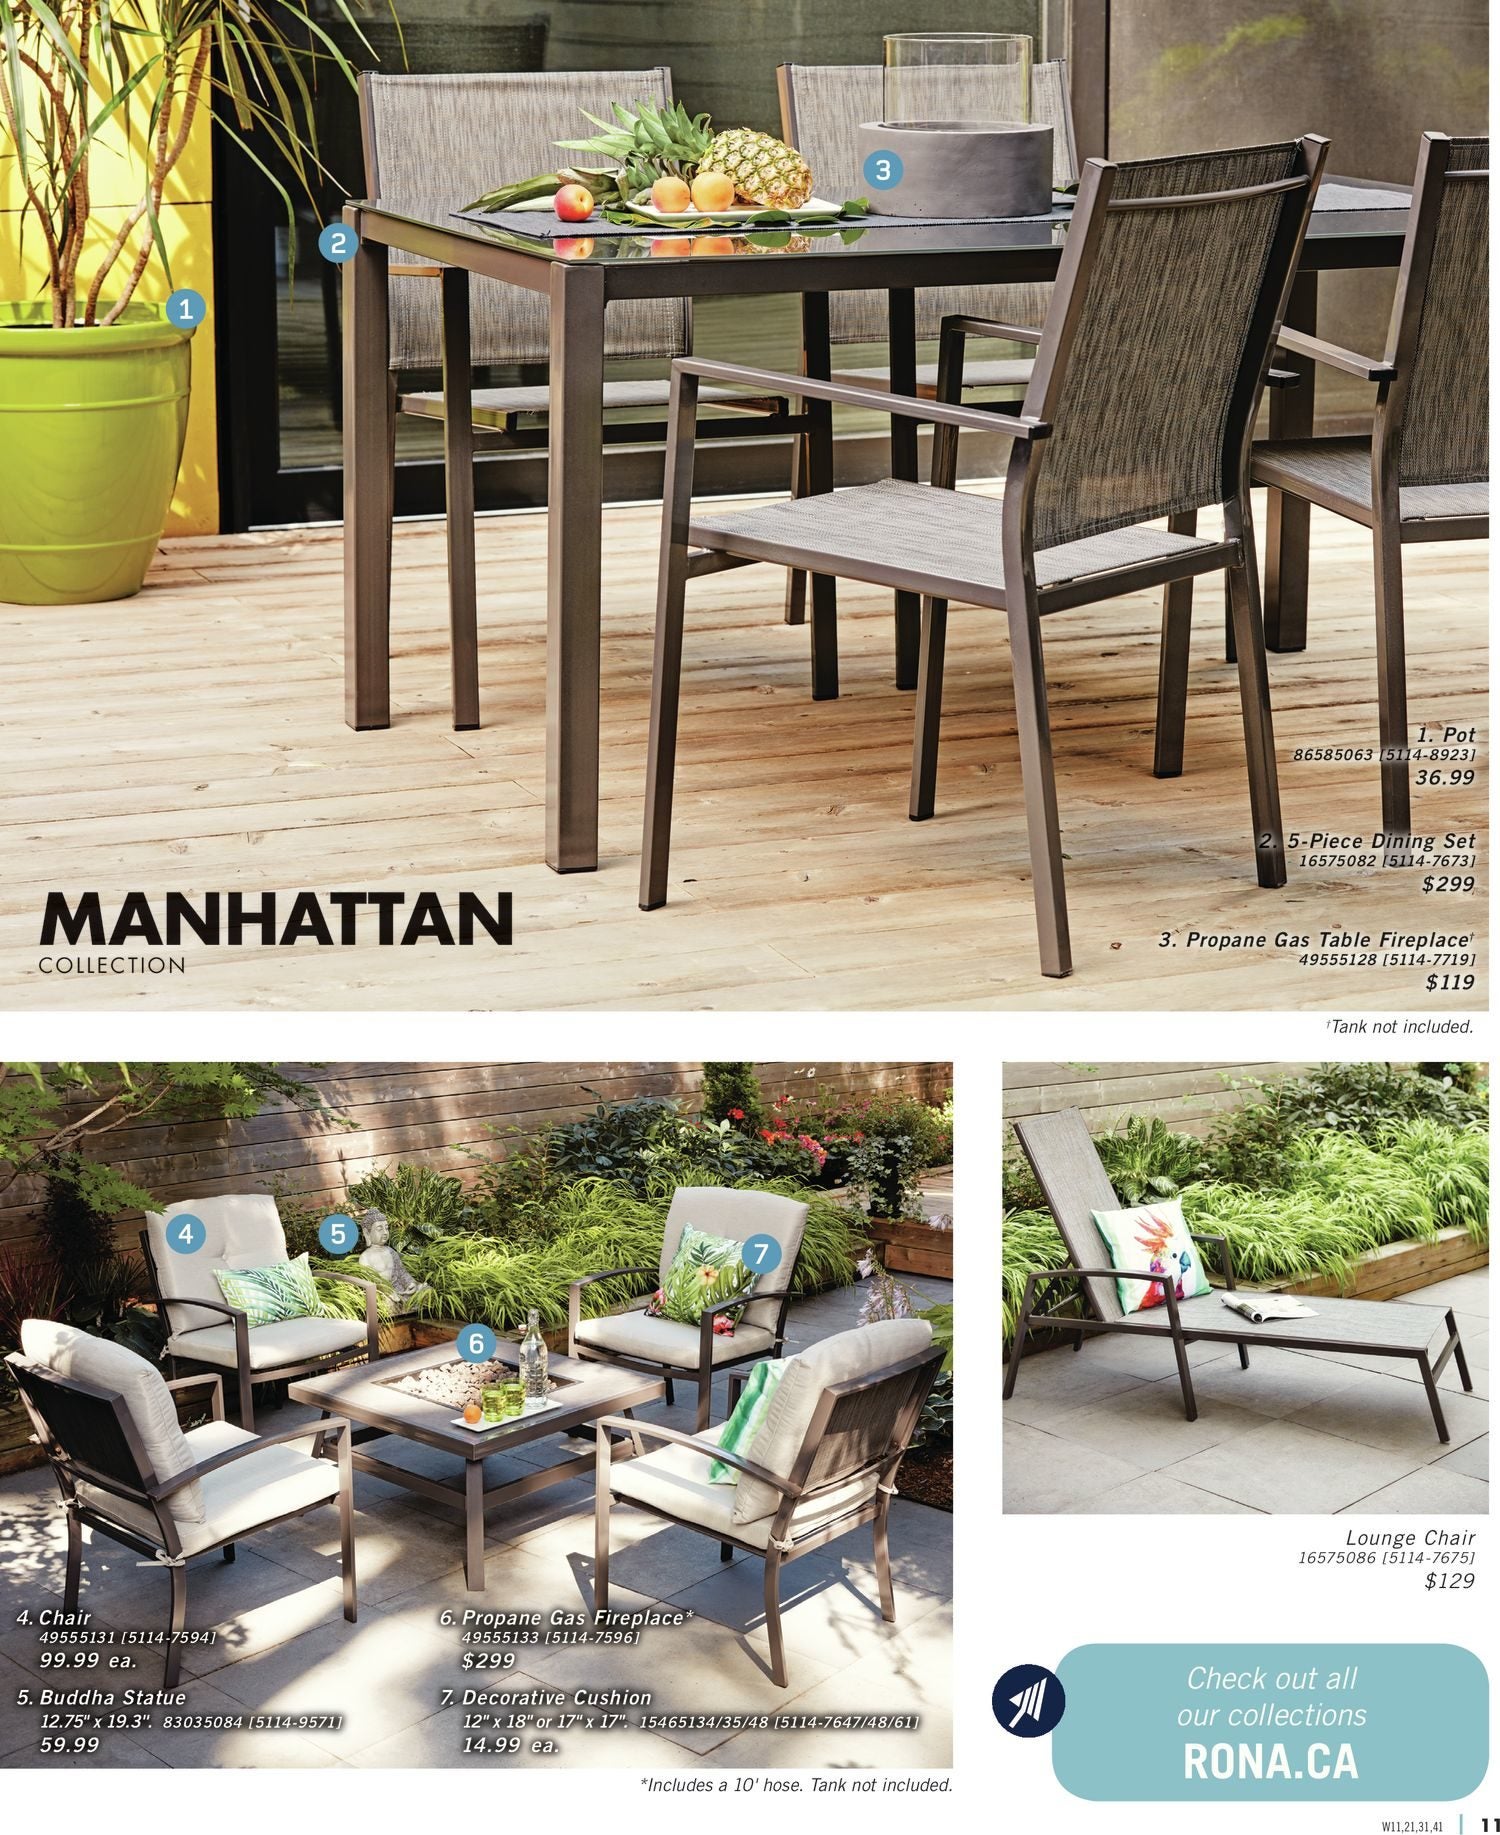 Rona Weekly Flyer Home Garden 2017 Spring Collections Mar 30